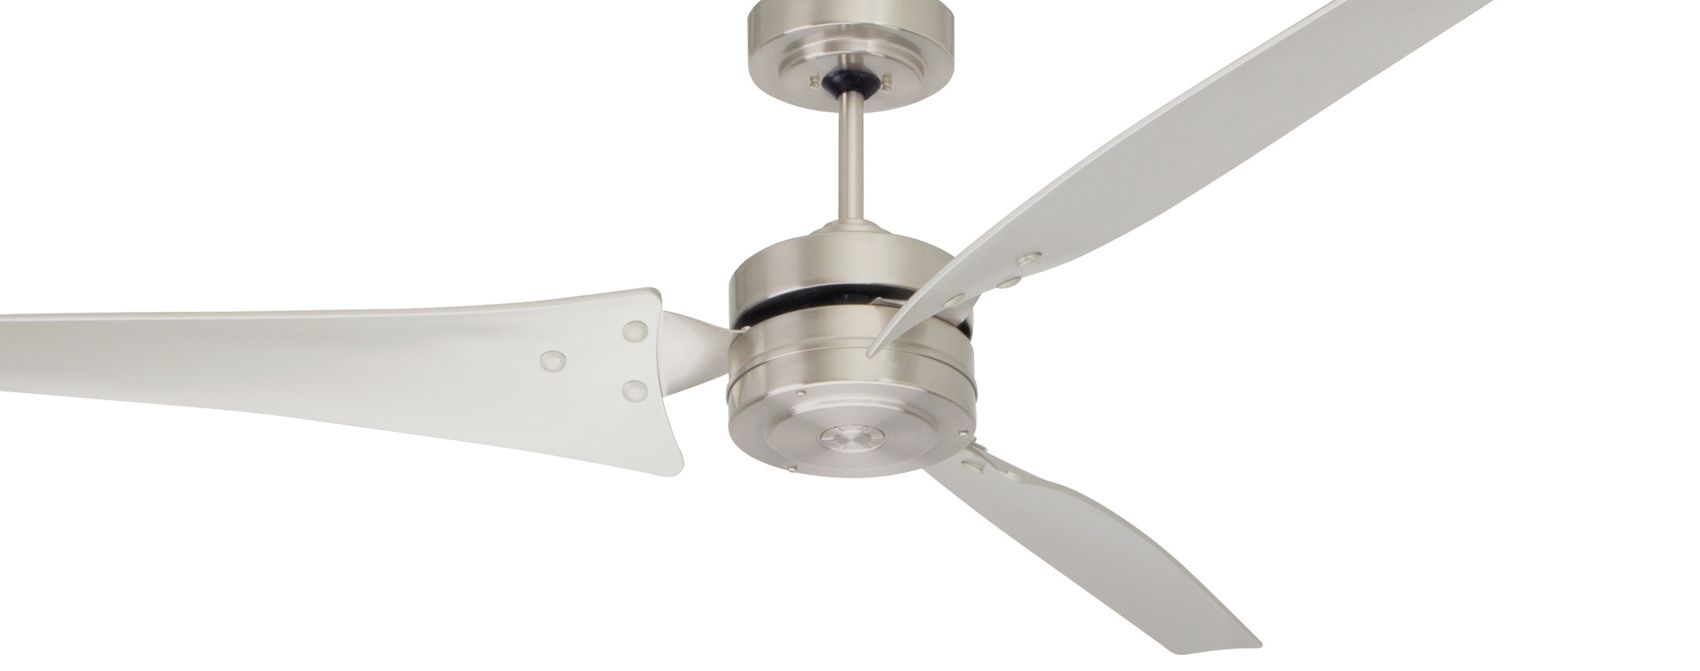 High Performance With Regard To Emerson Outdoor Ceiling Fans With Lights (View 12 of 20)